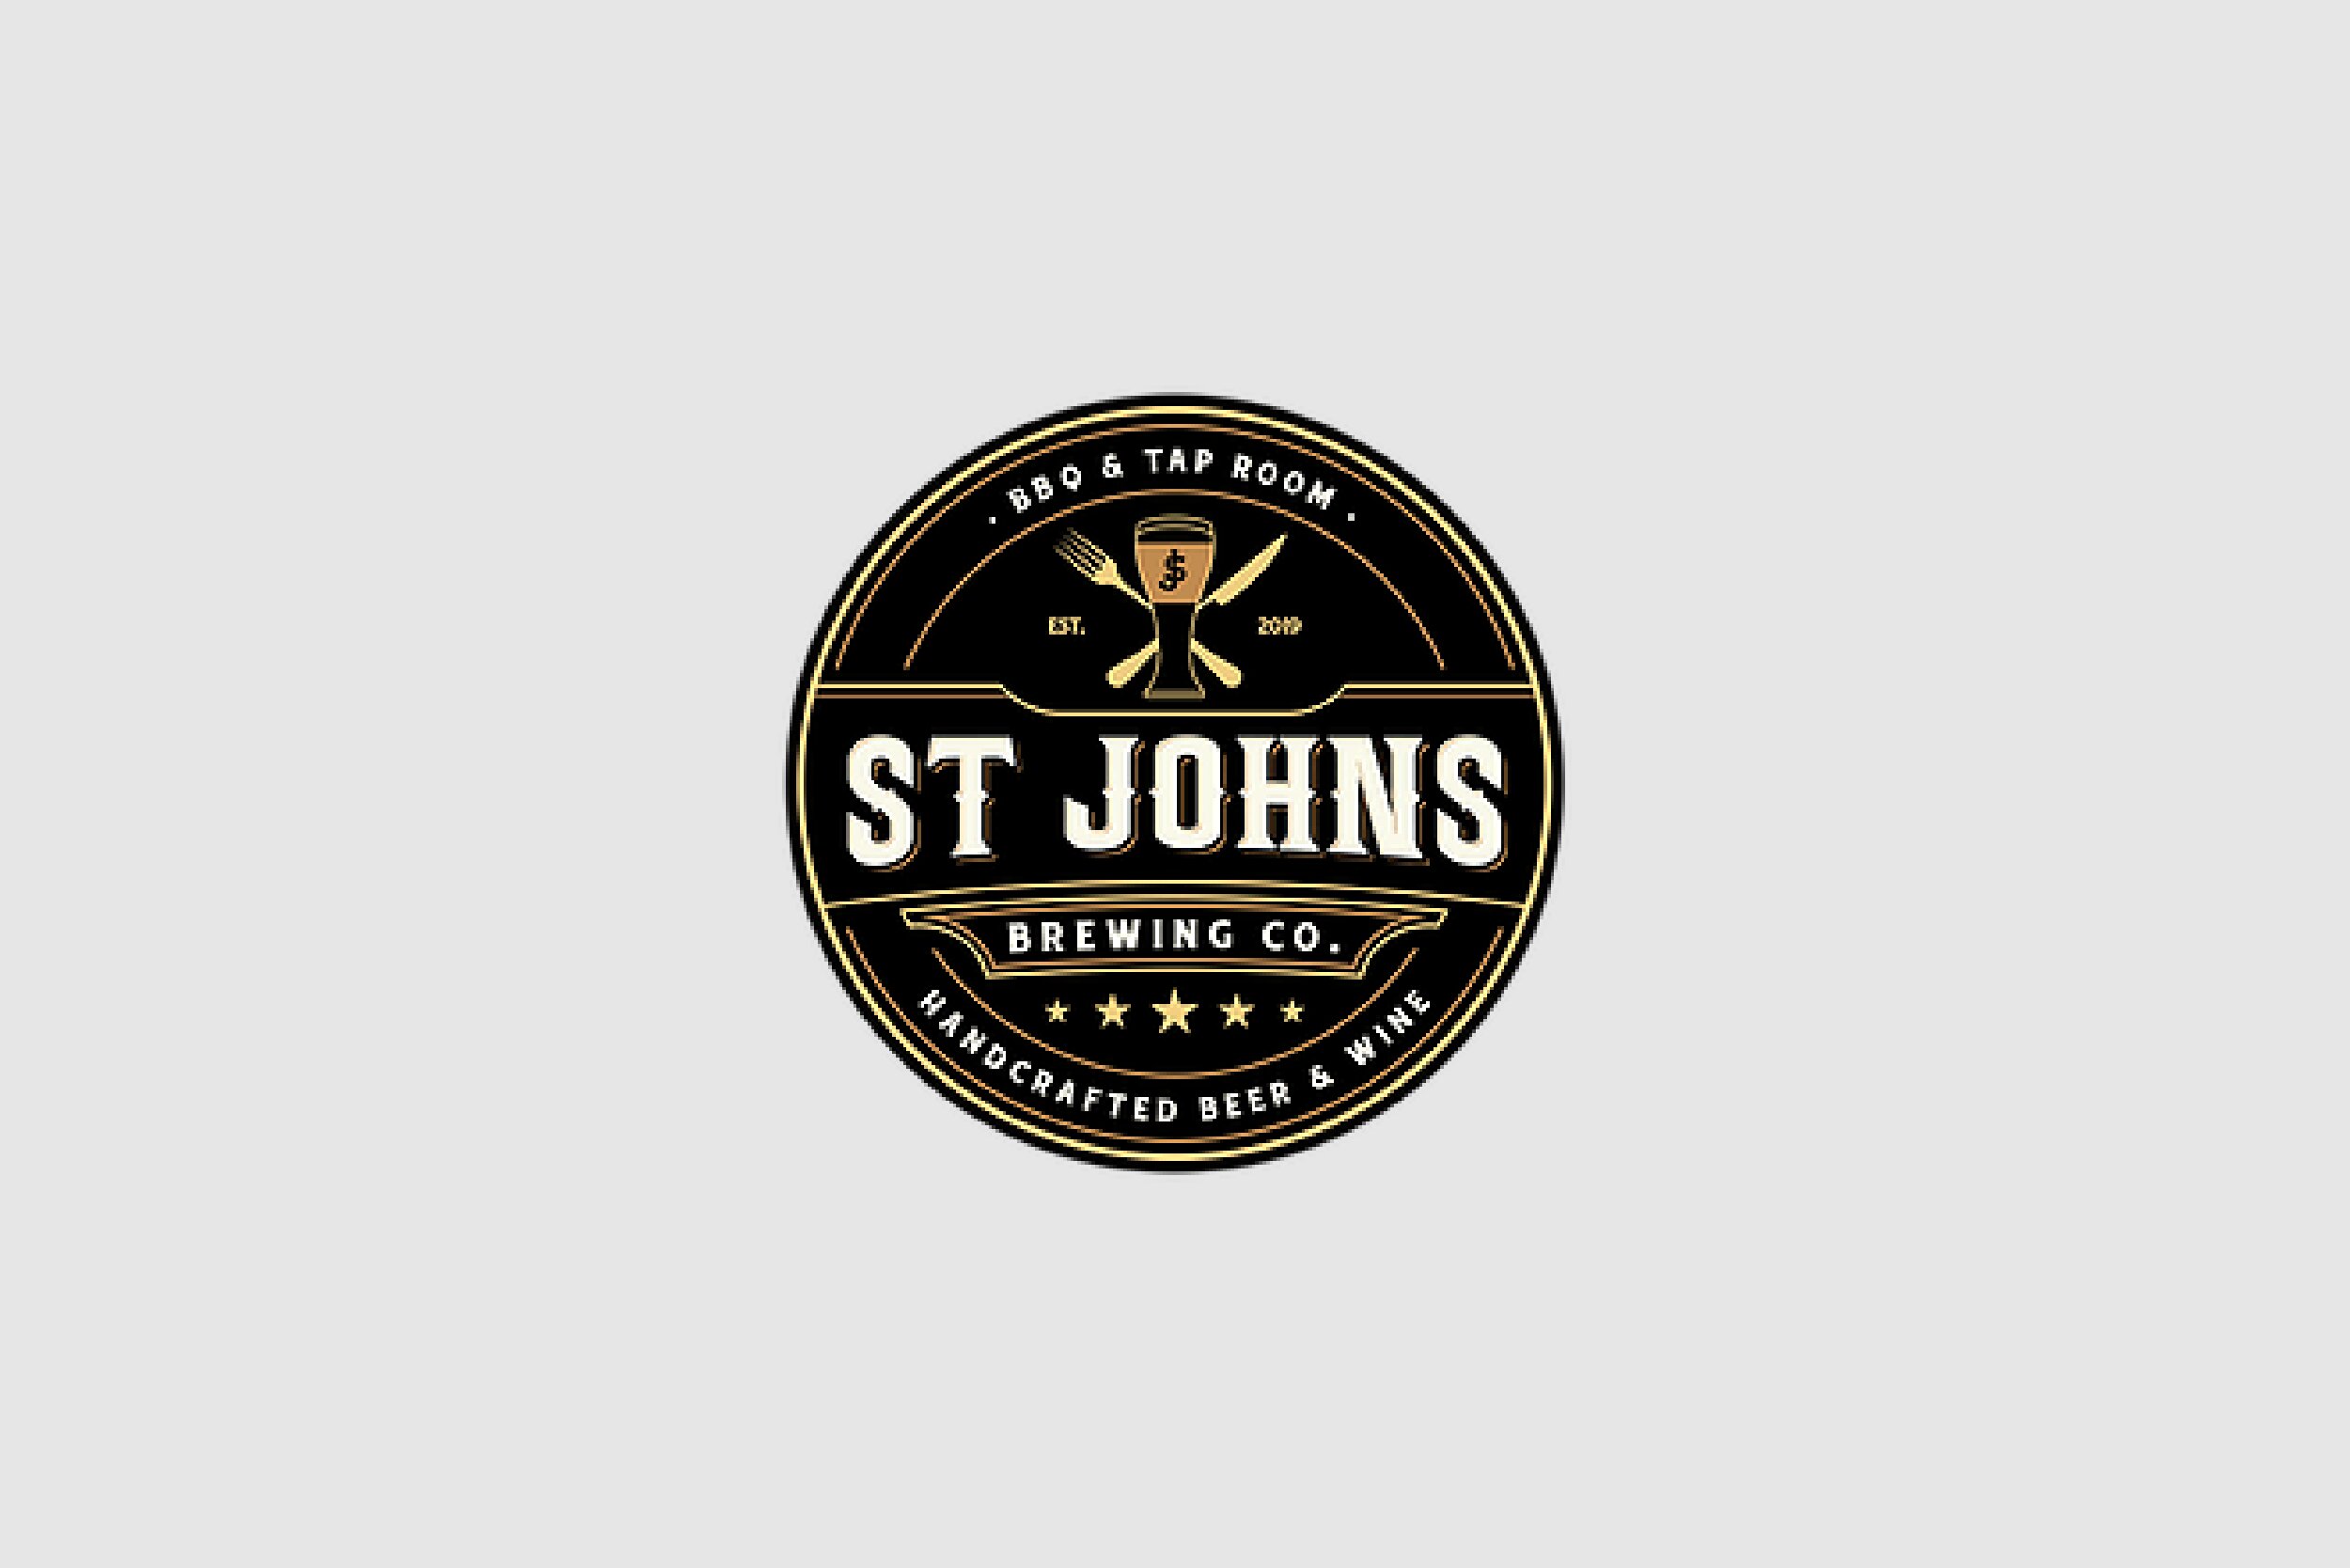 St Johns Brewing Co.